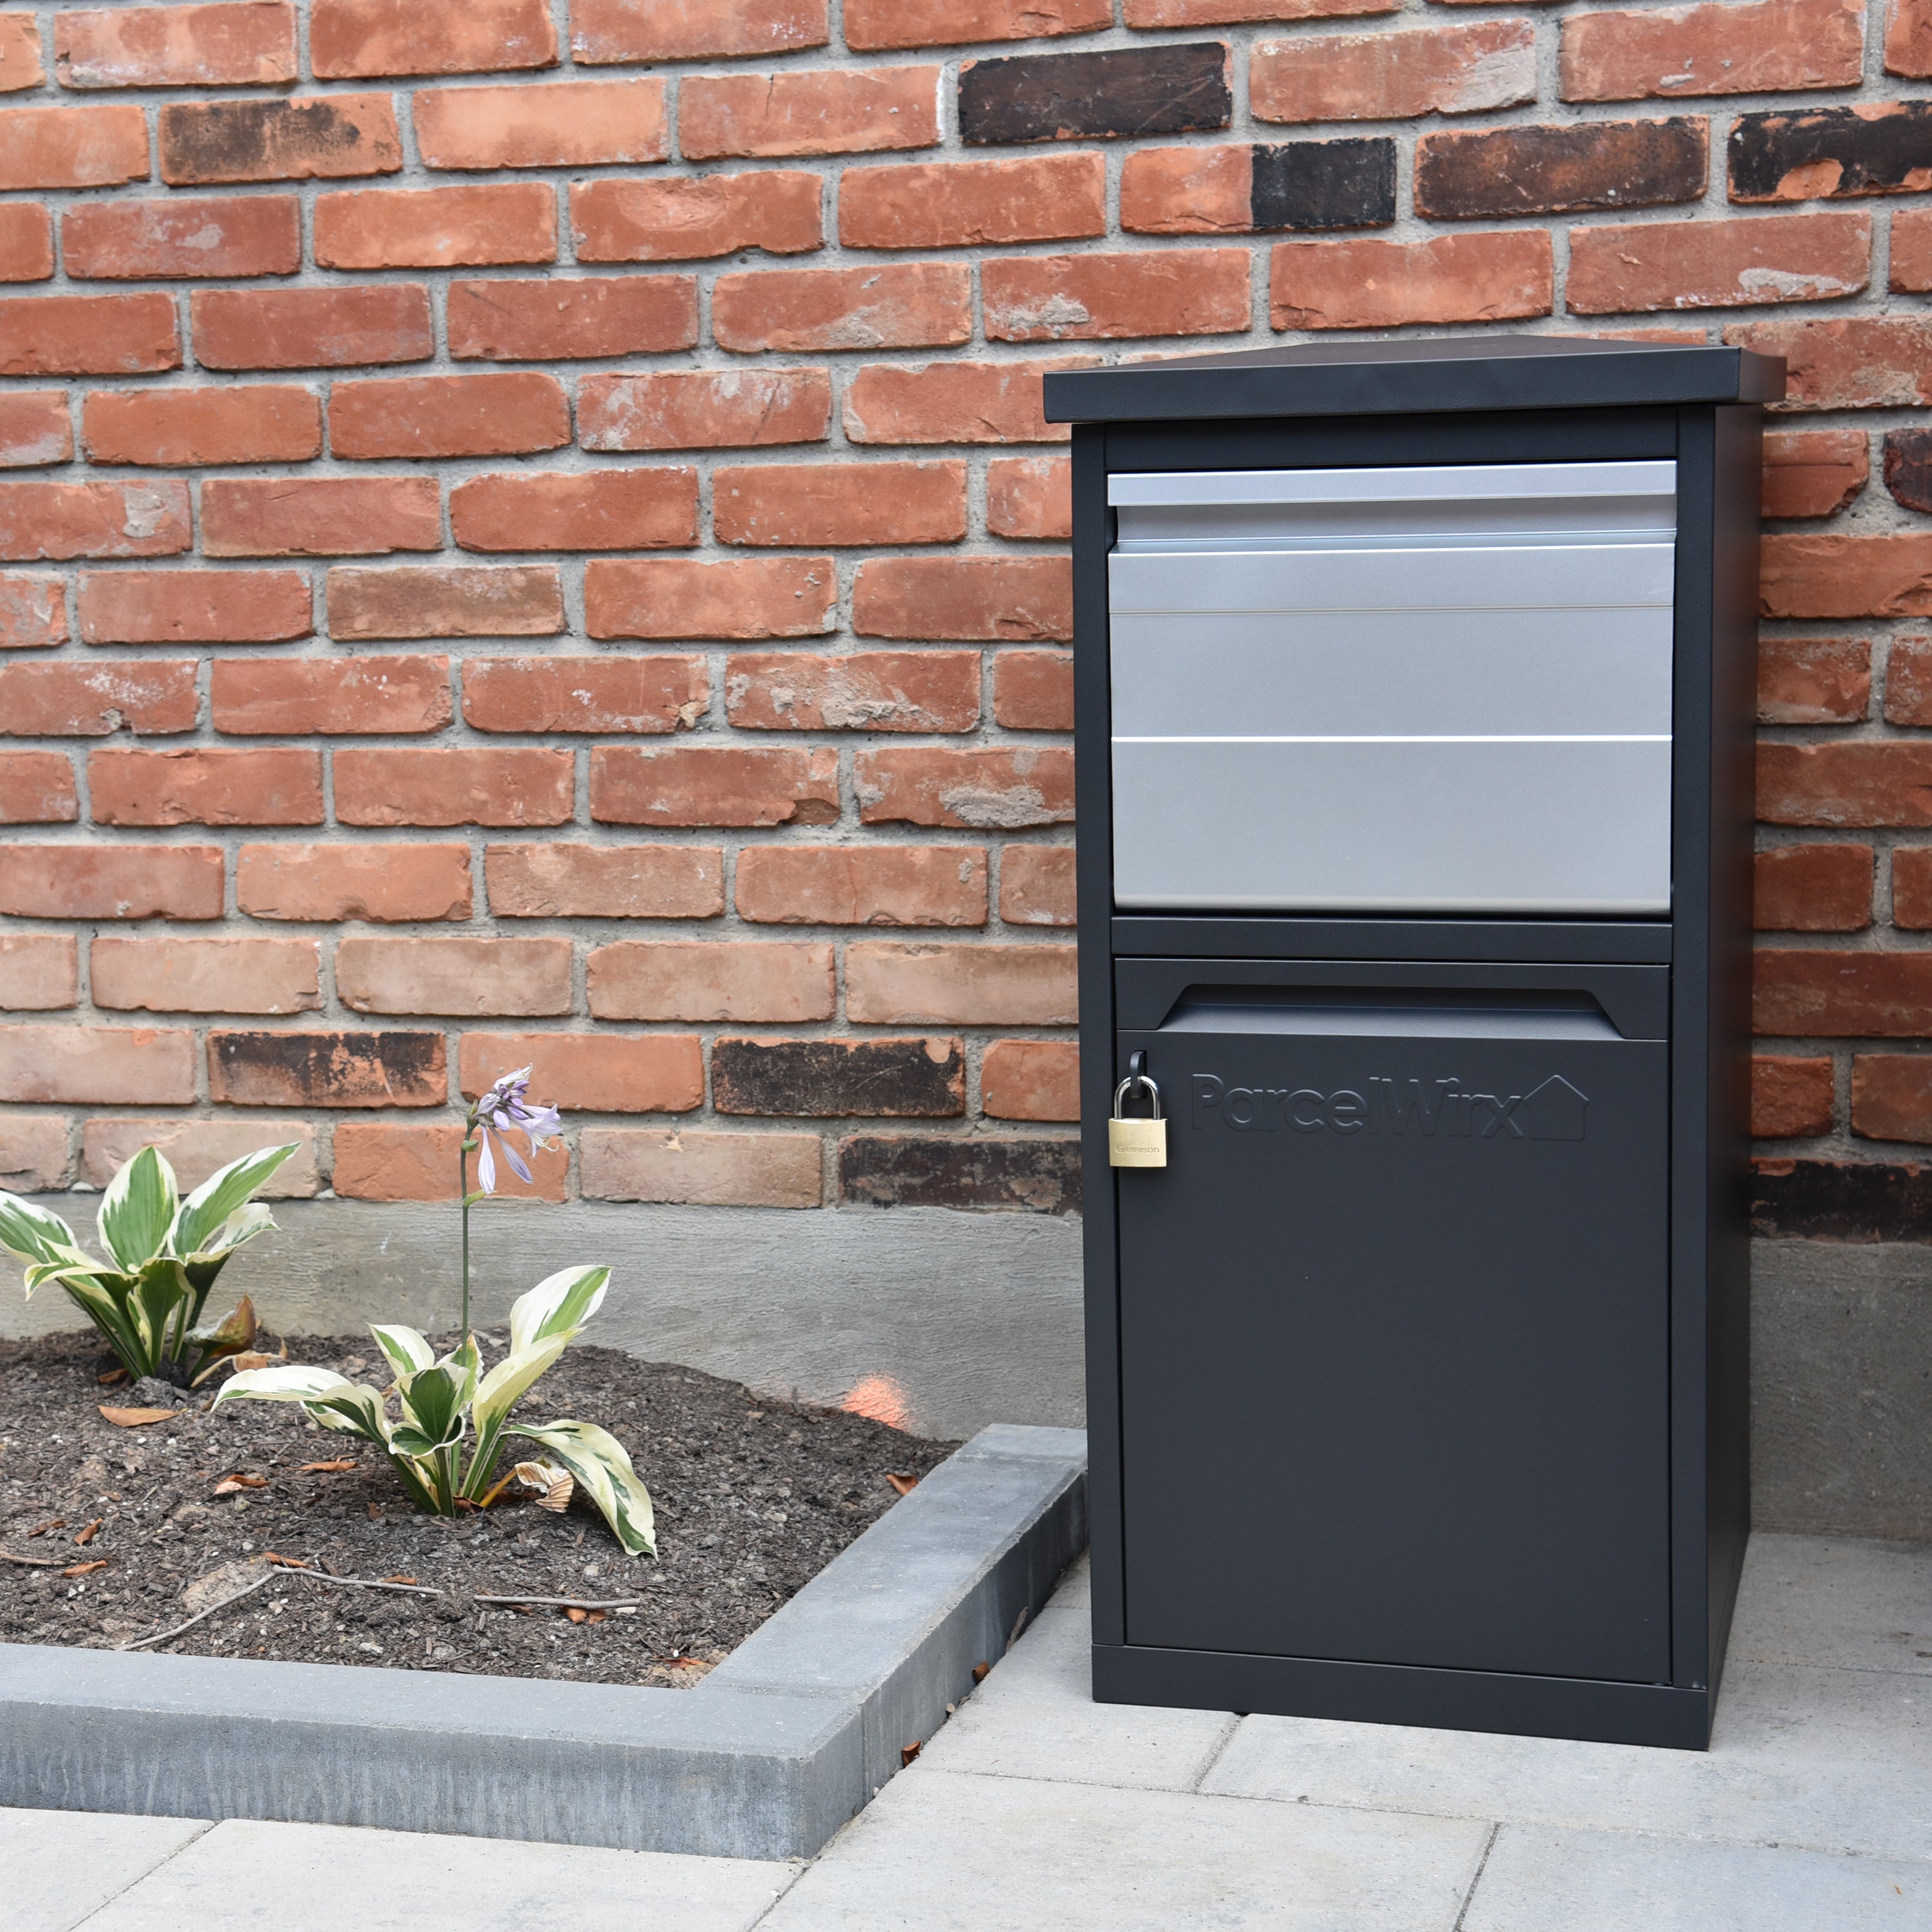 Parcelwirx drop box with chute locked against a brick house